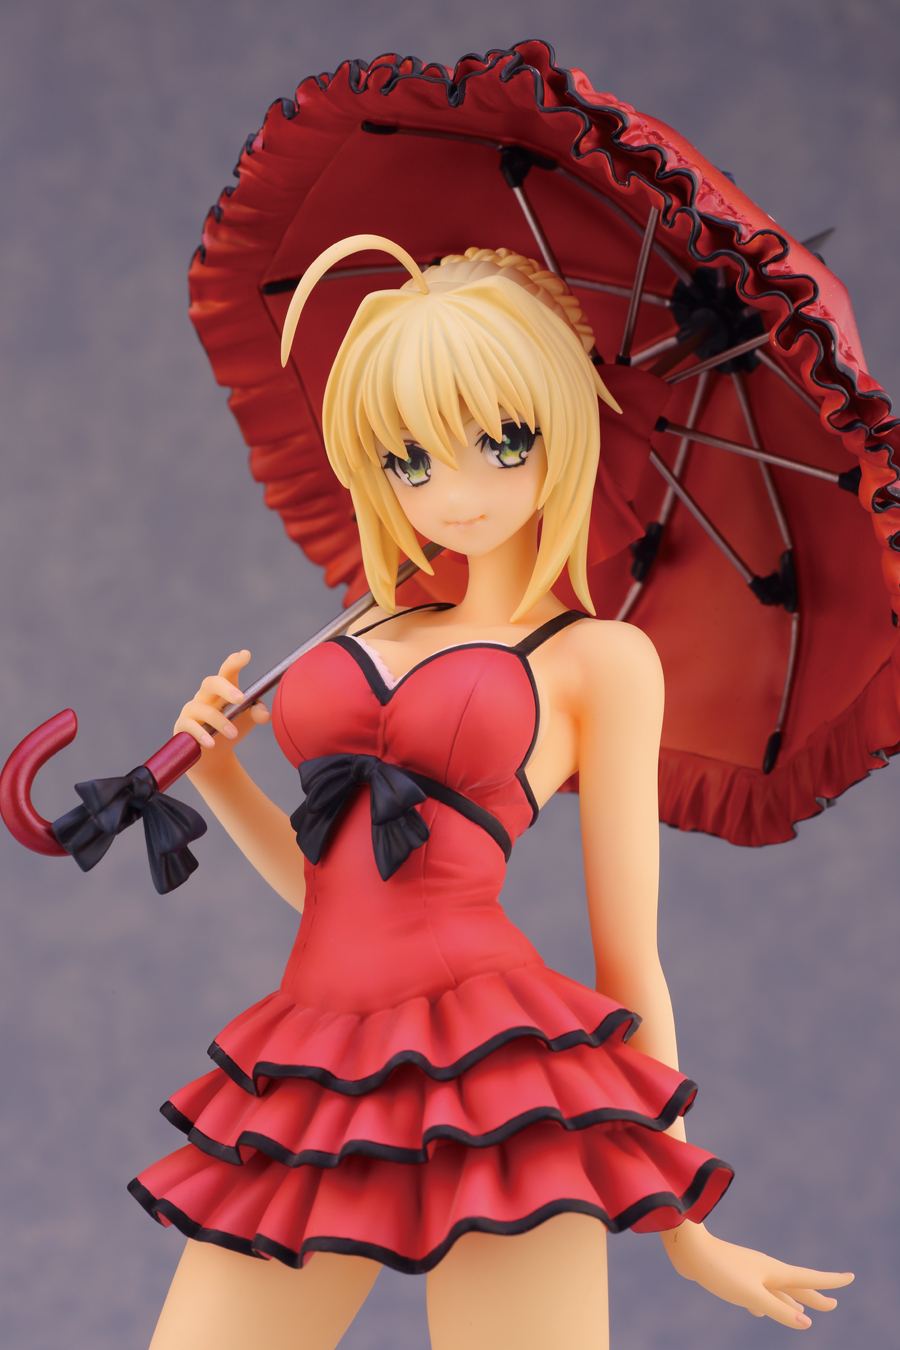 Alphamax Fateextra CCC Saber PVC Figure Onepiece Dress Version 17 Scale for sale online 